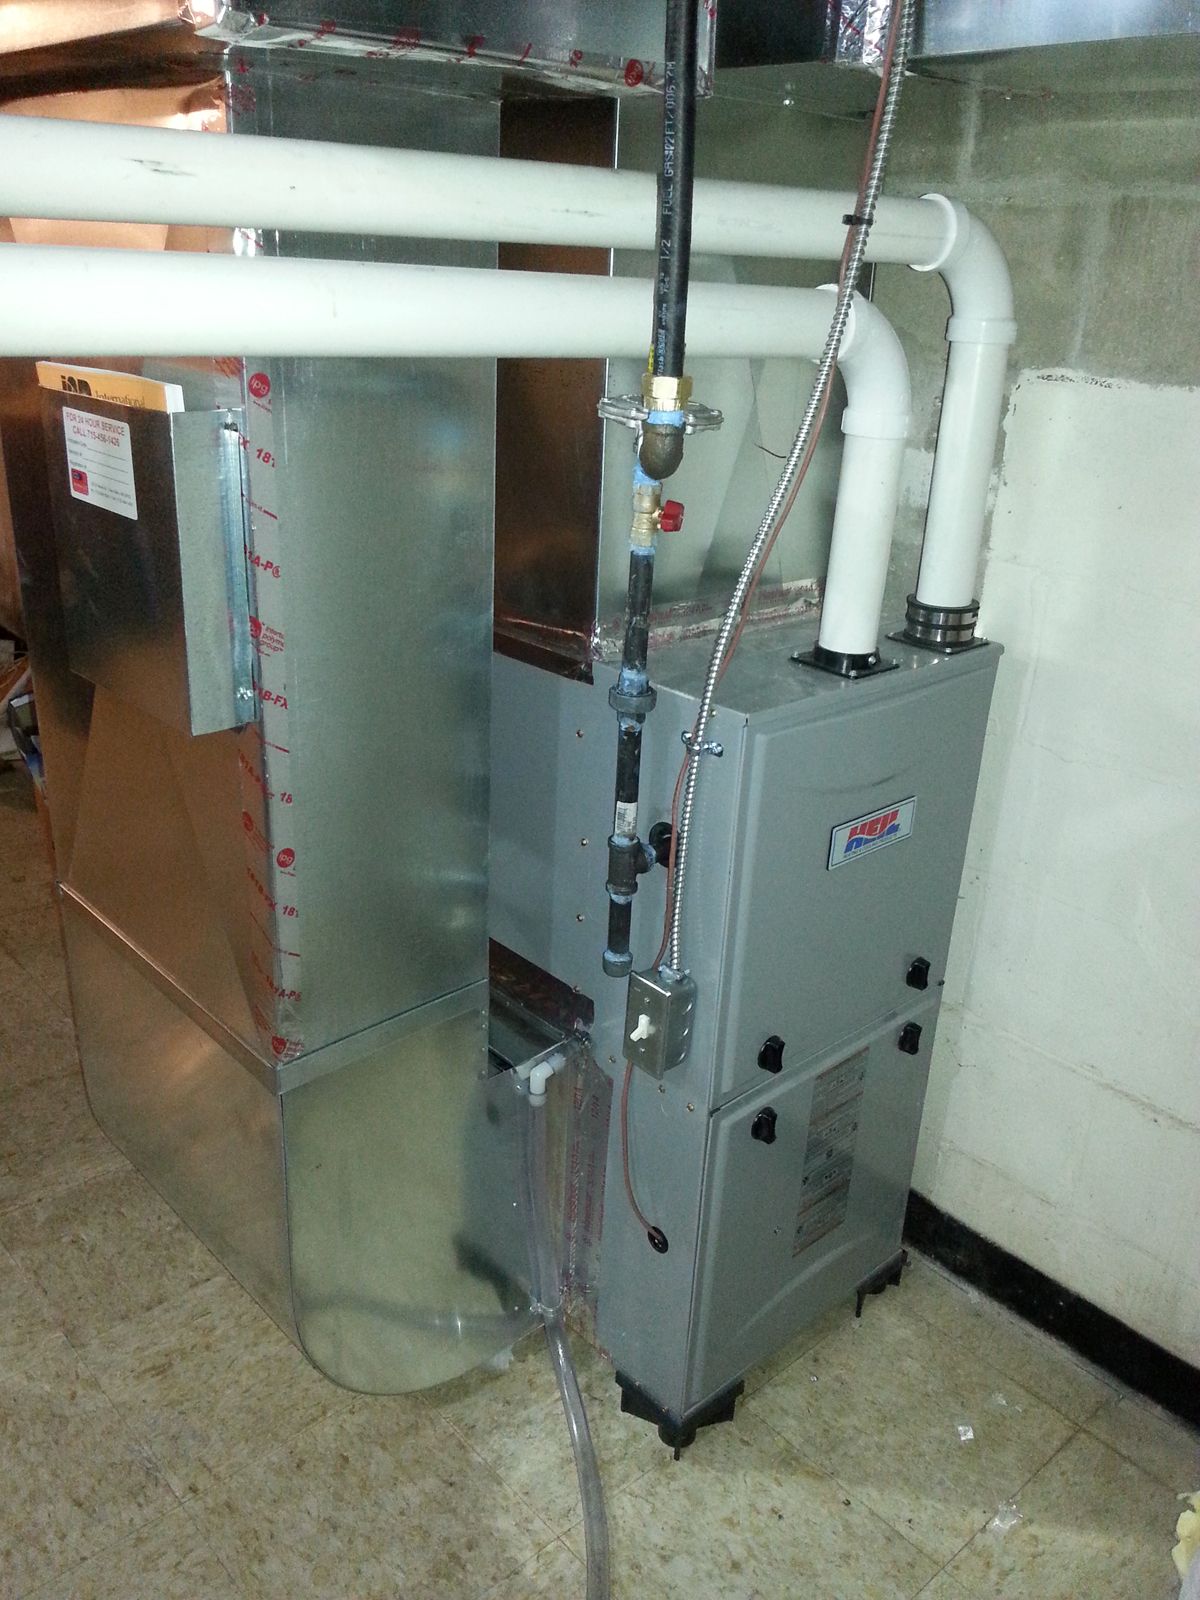 Furnace Installation Services Available in Kansas City and the Surrounding Areas